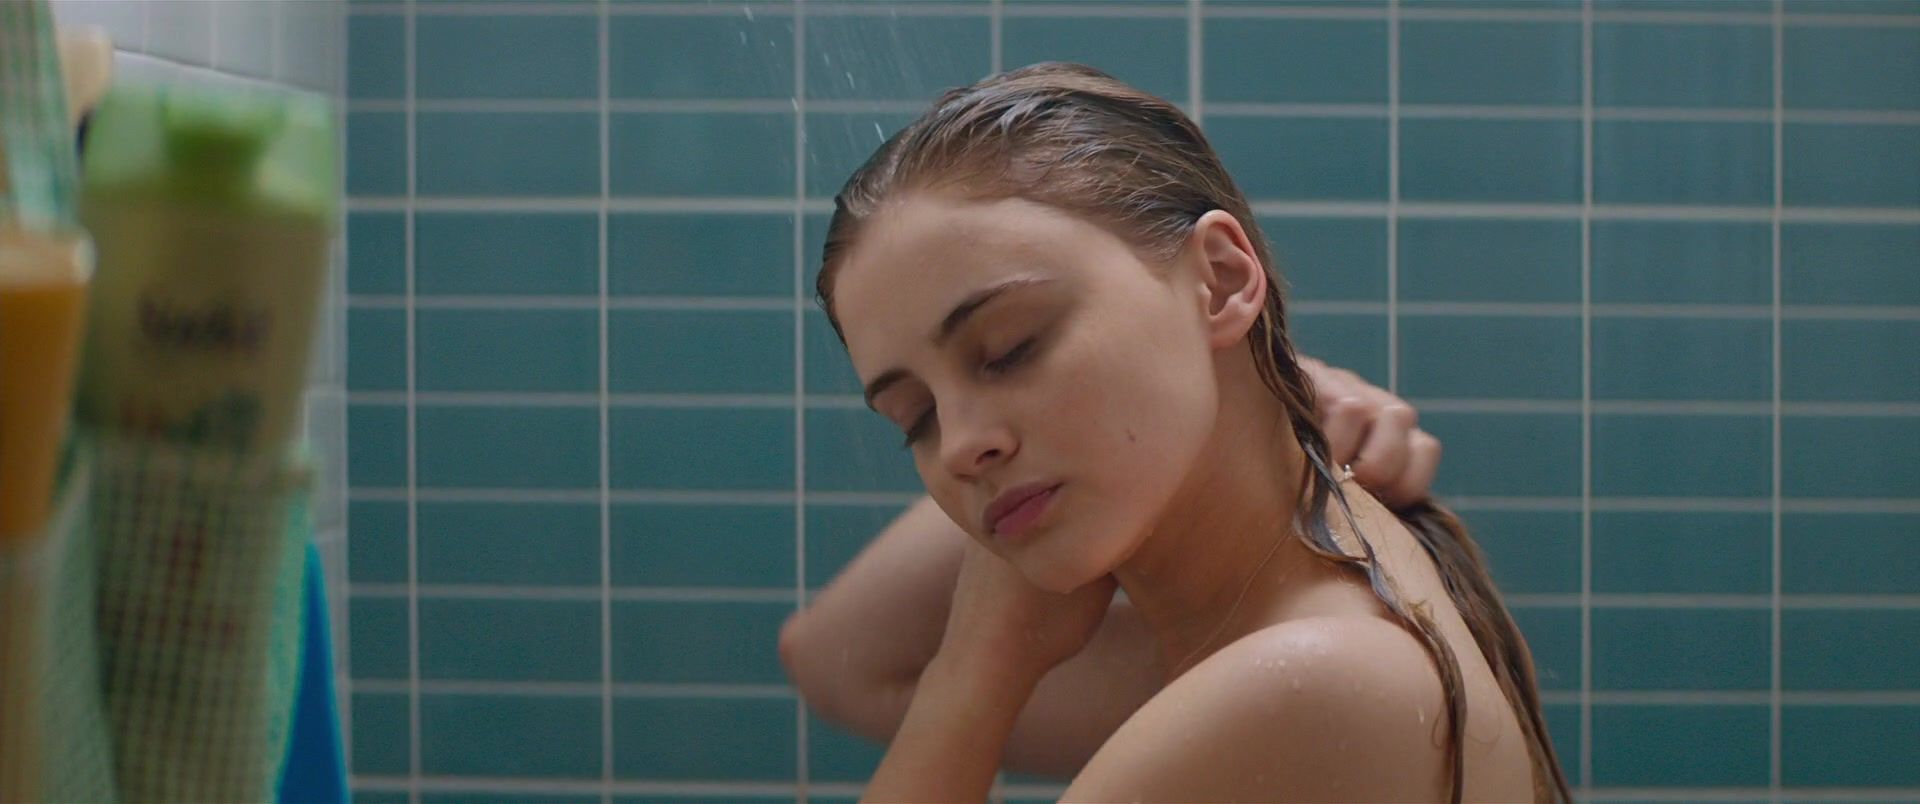 Amateur Blow Job Josephine Langford nude - After (2019) Housewife